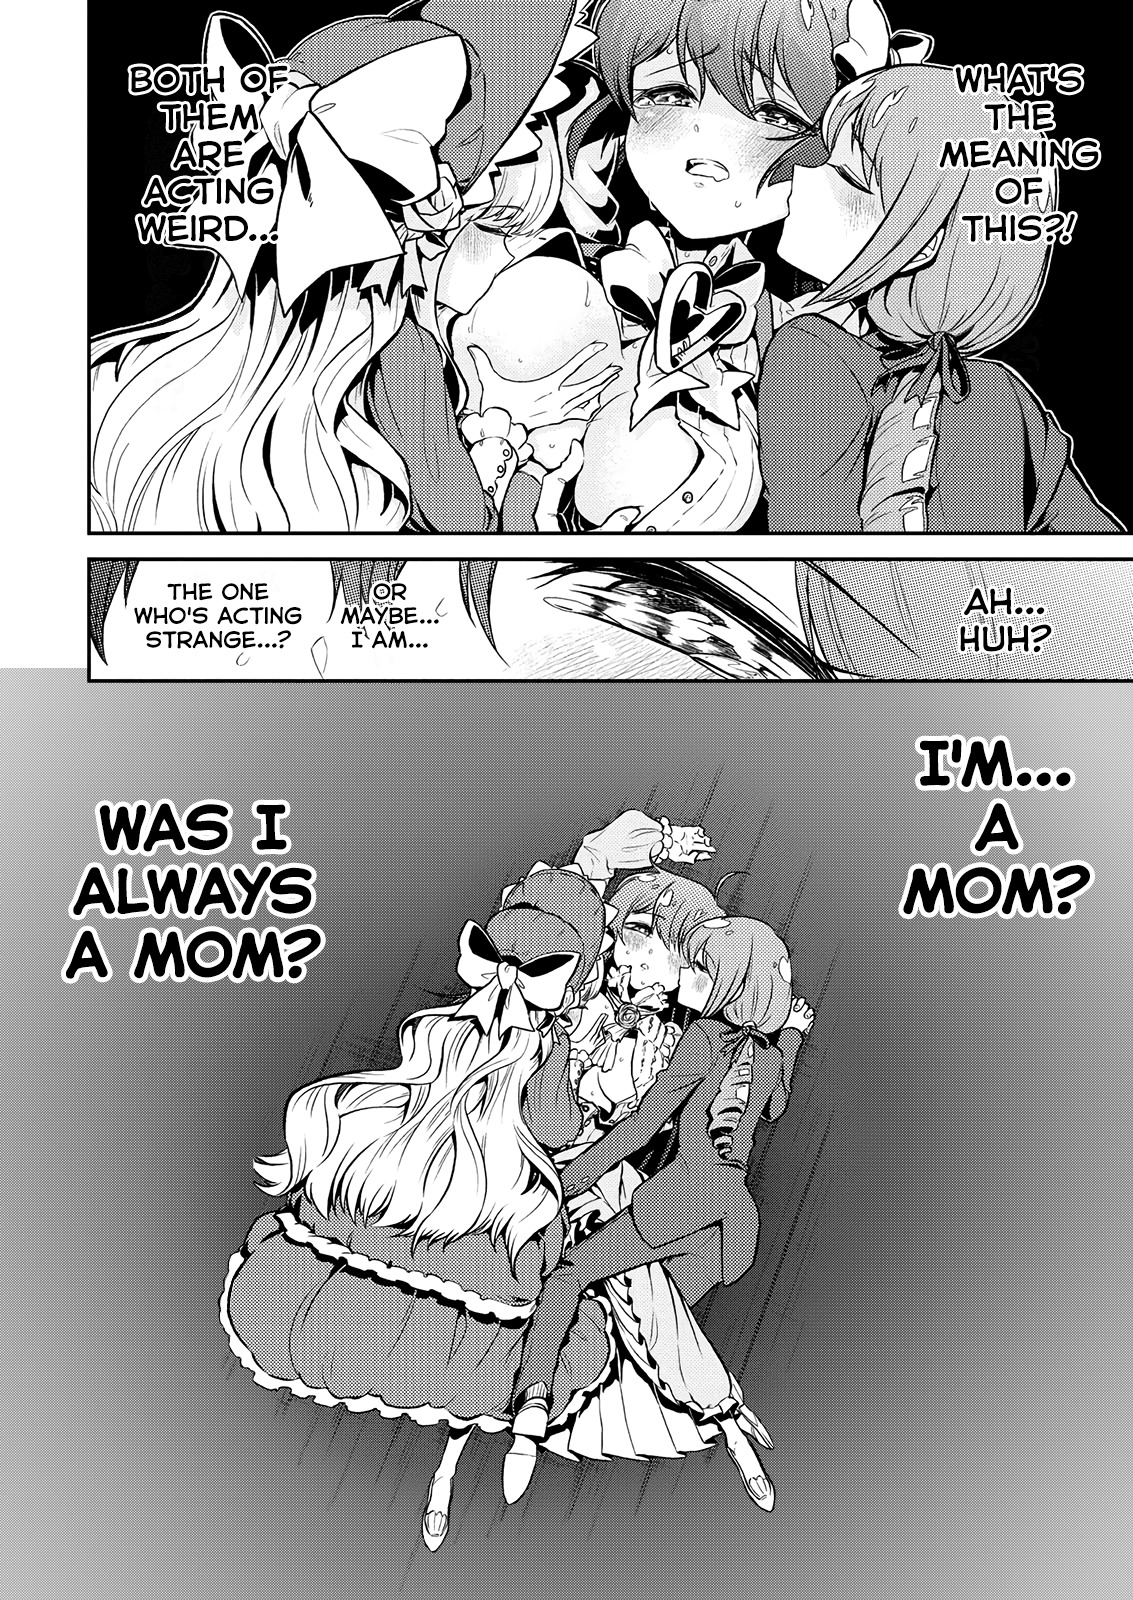 Looking up to Magical Girls vol.2 ch.9